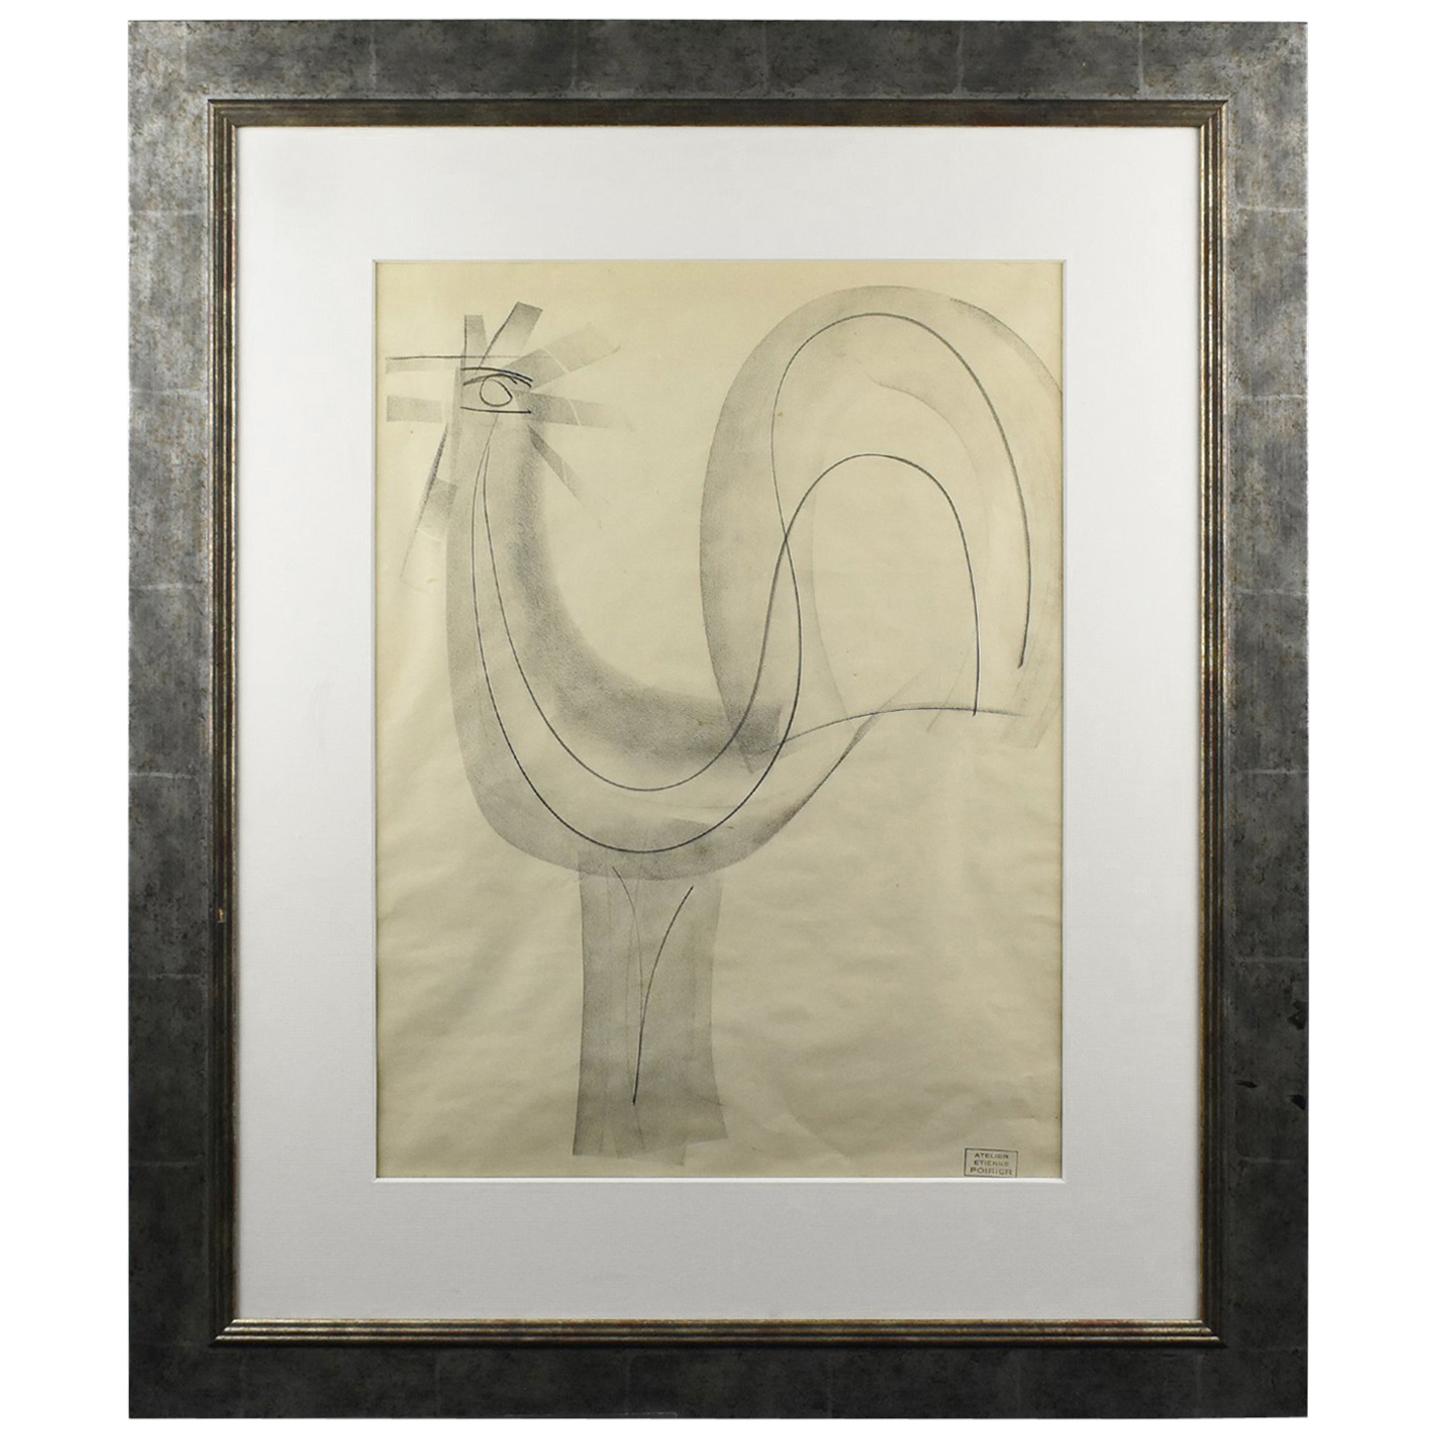 Atelier Etienne Poirier France 1950s Charcoal Drawing 'The Rooster'